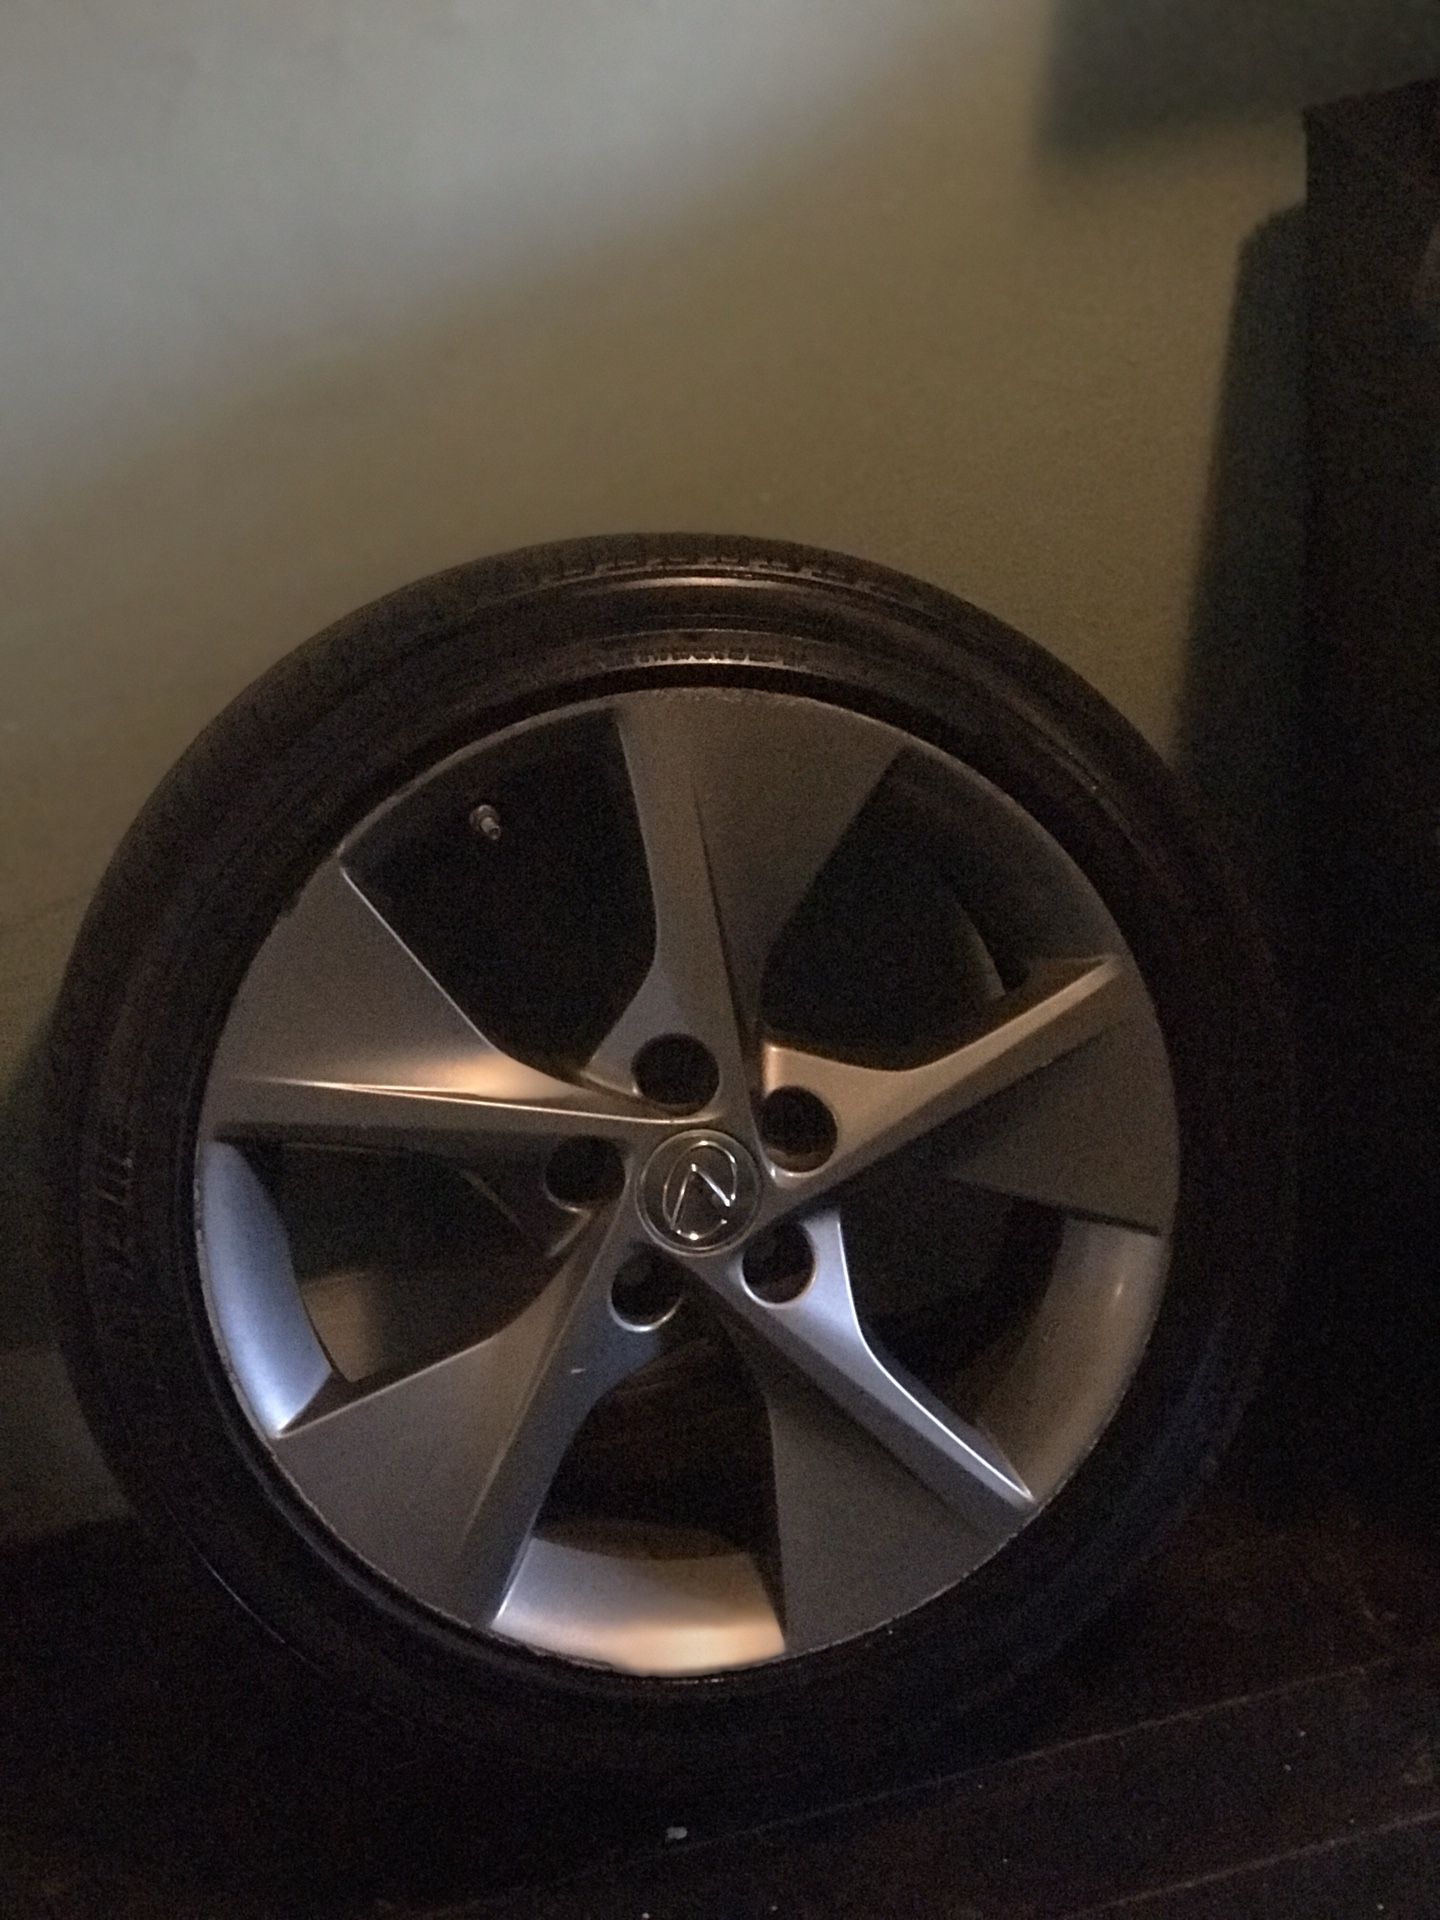 18 inch fan rims have all 4 asking 400 or I’ll trade for accord rims depending on condition